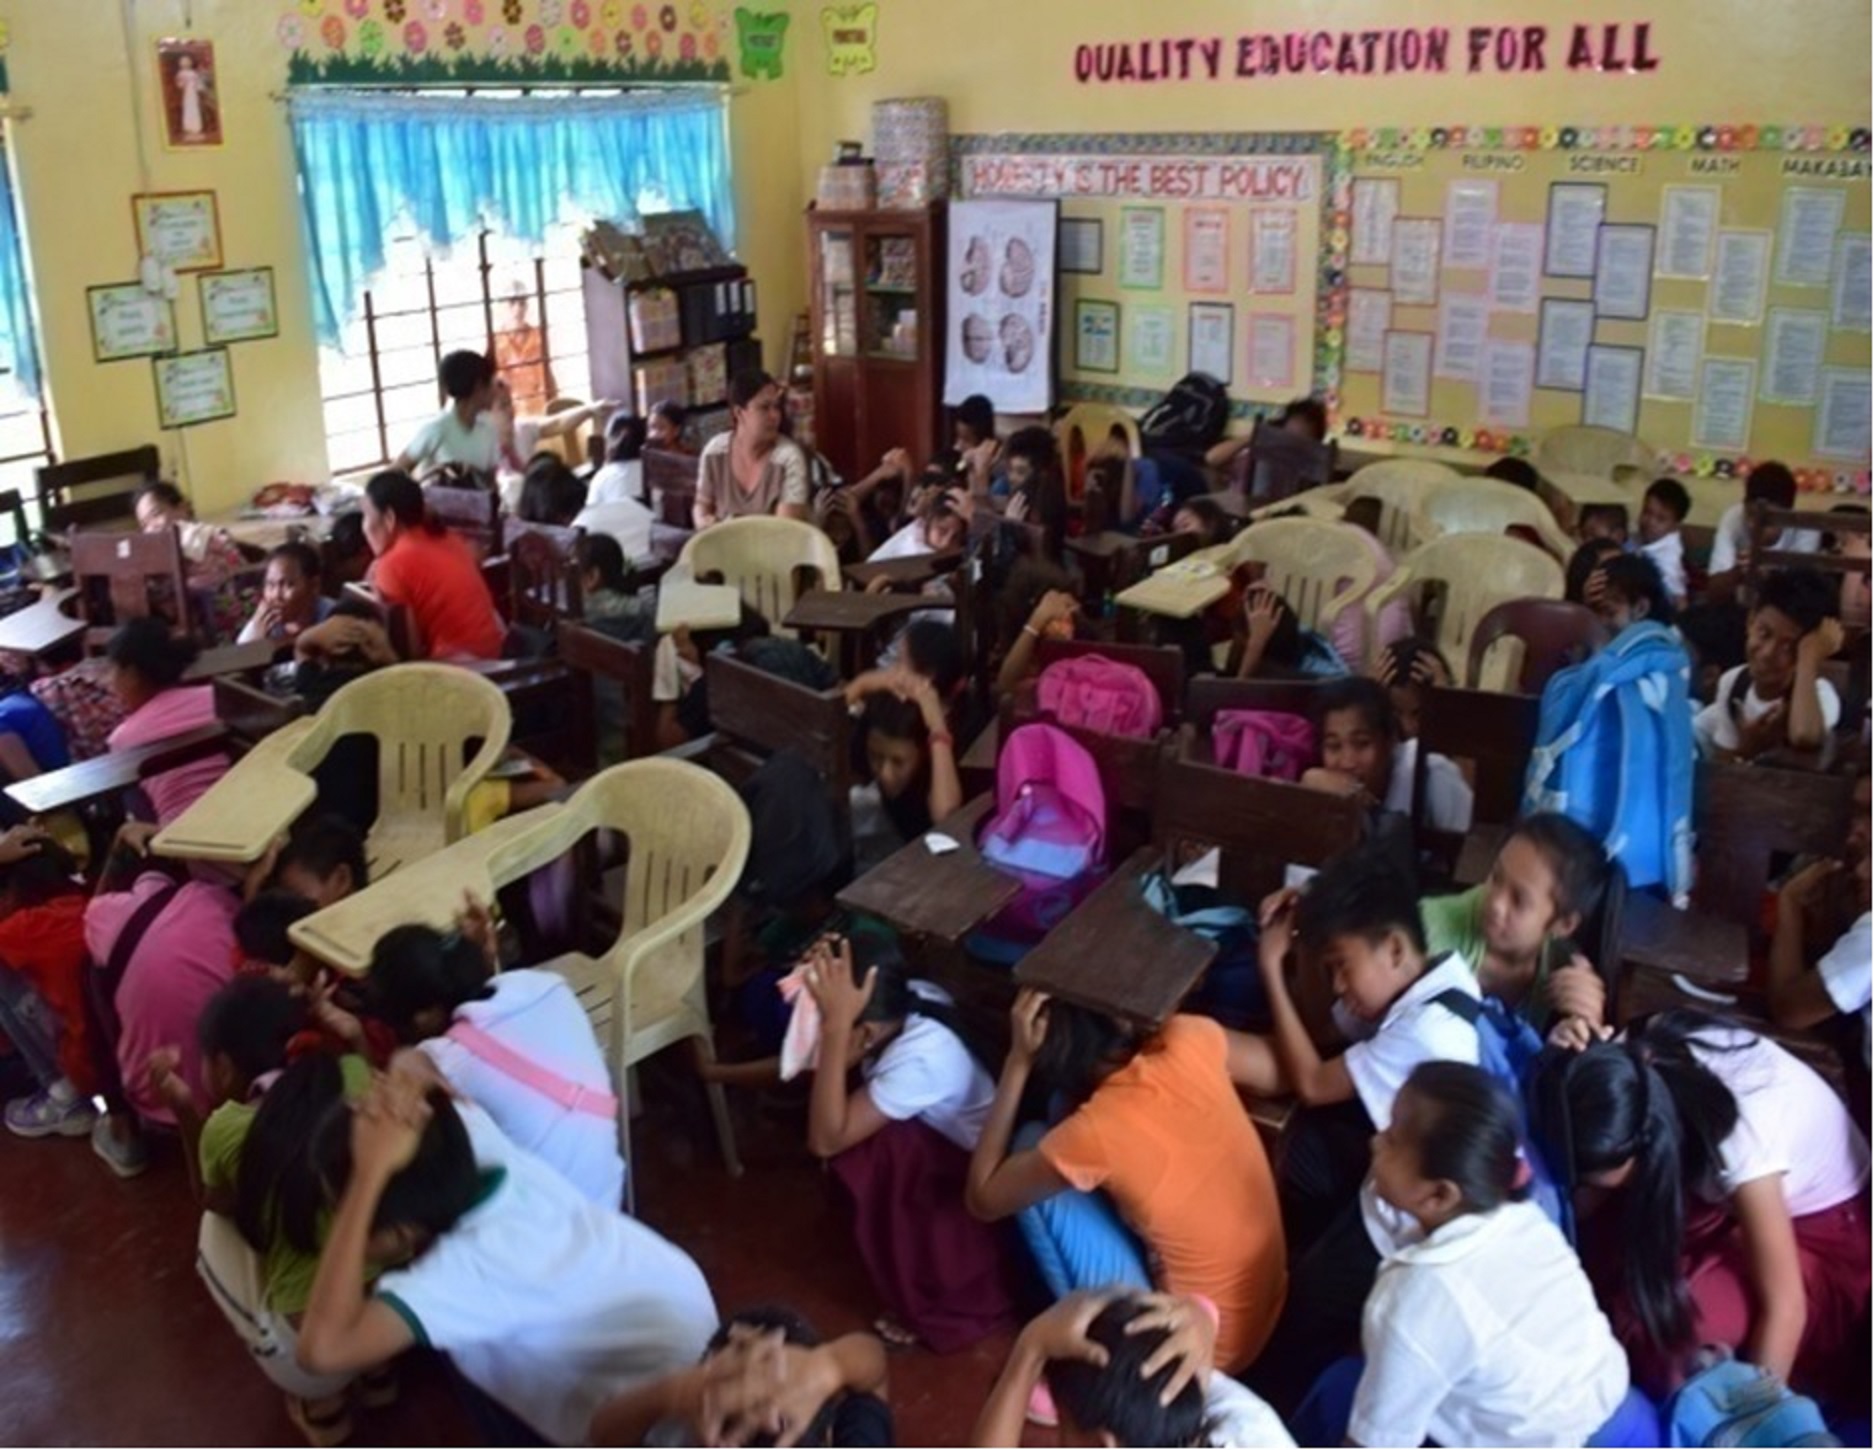 QUAKE DRILL. Students perform the earthquake drill in one of the Oplan ANDAM caravans. (Photo courtesy of Davao del Norte PDRRM.)